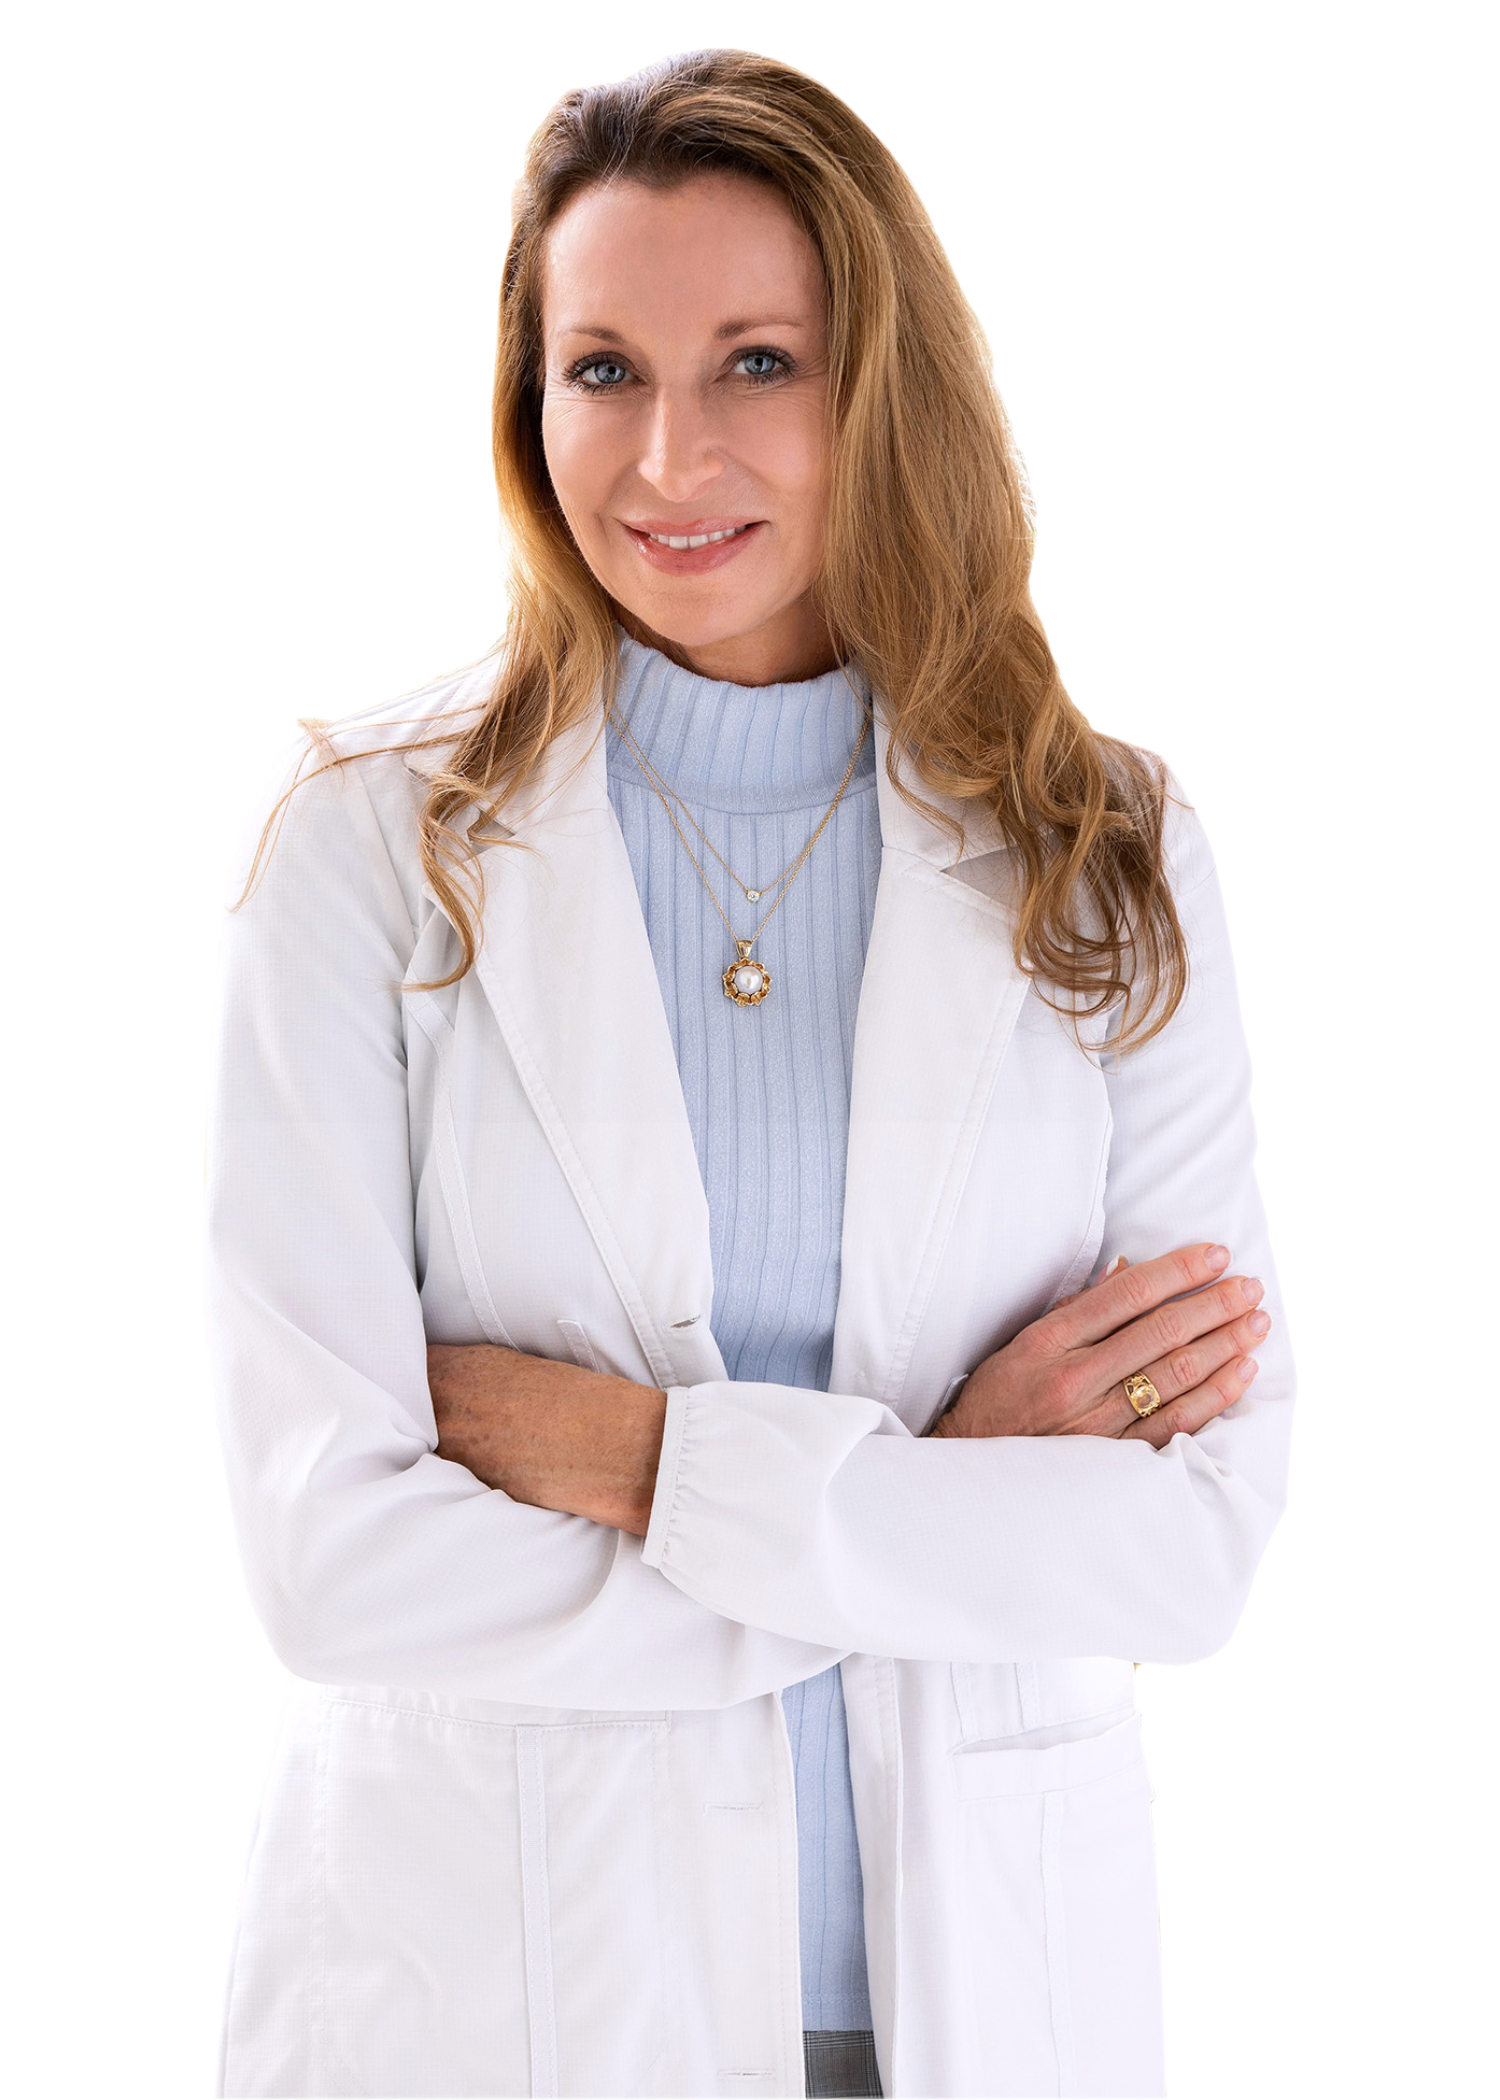 Dr. Kathy Veon, a holistic doctor specializes in Holistic Medicine, Functional Medicine, Preventive Medicine for Lake Mary, Longwood, Winter Park, Altamonte Springs, Orlando, and all of Central Florida.